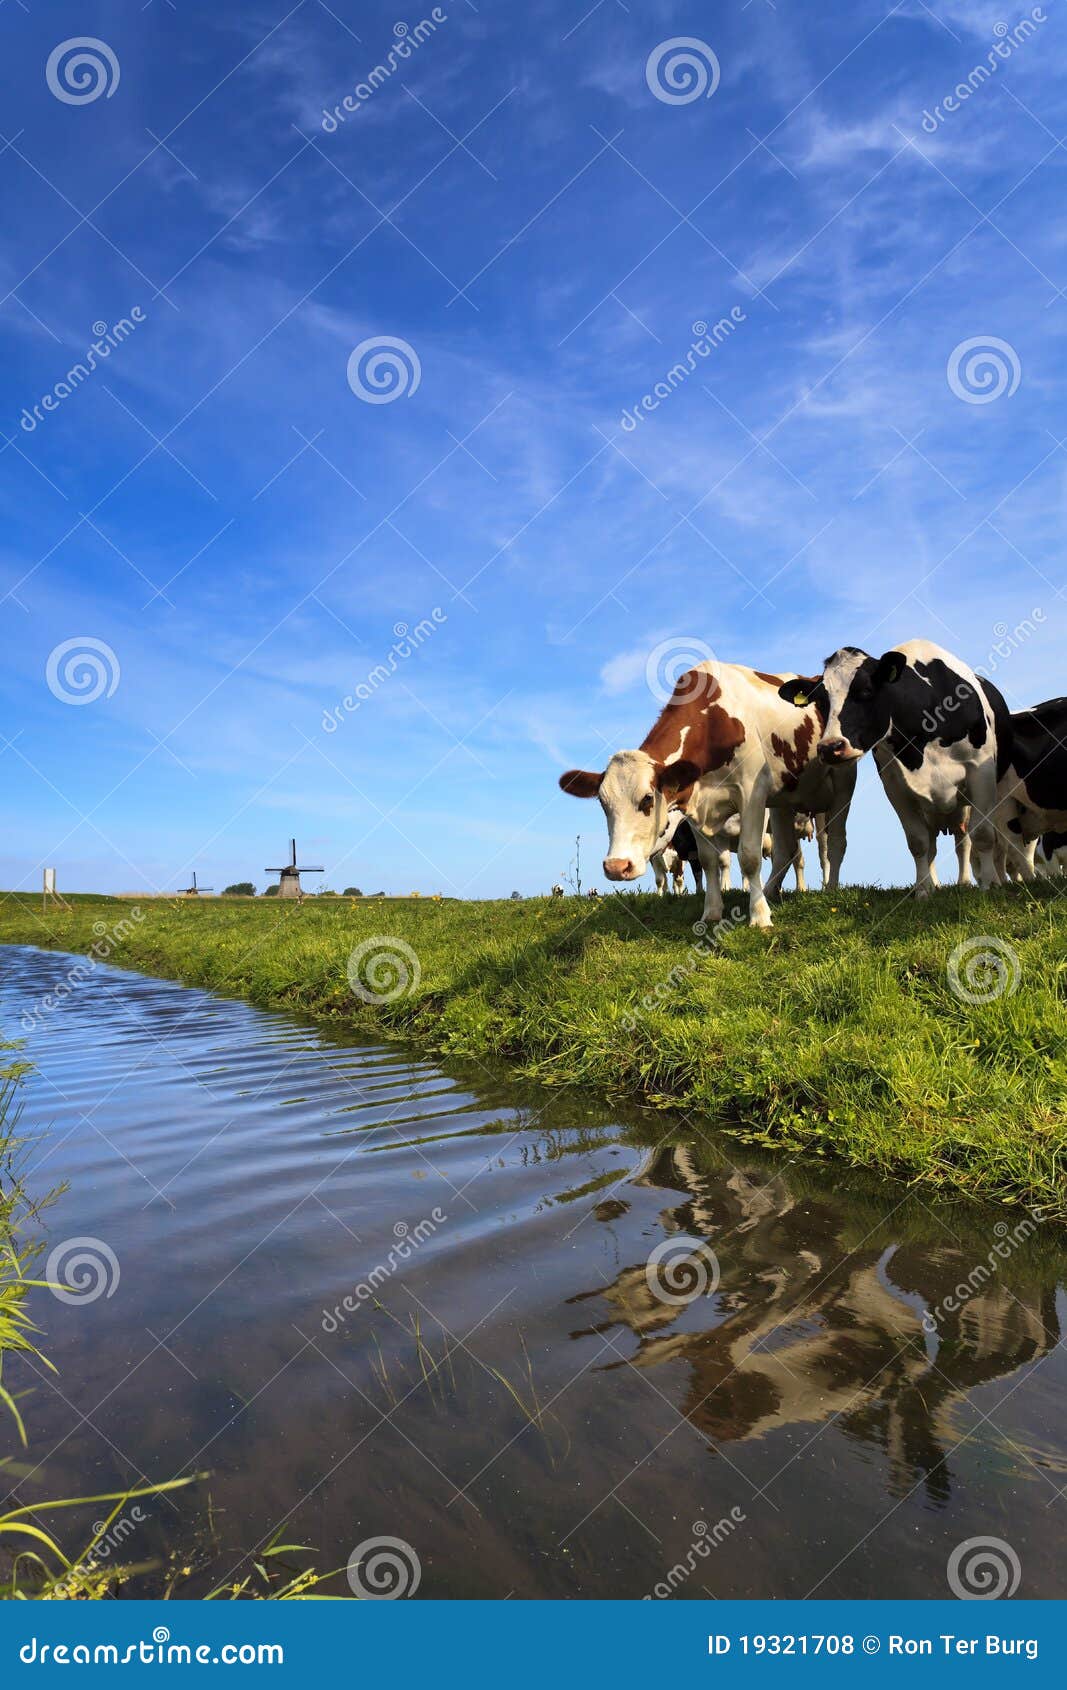 cows standing at a ditch